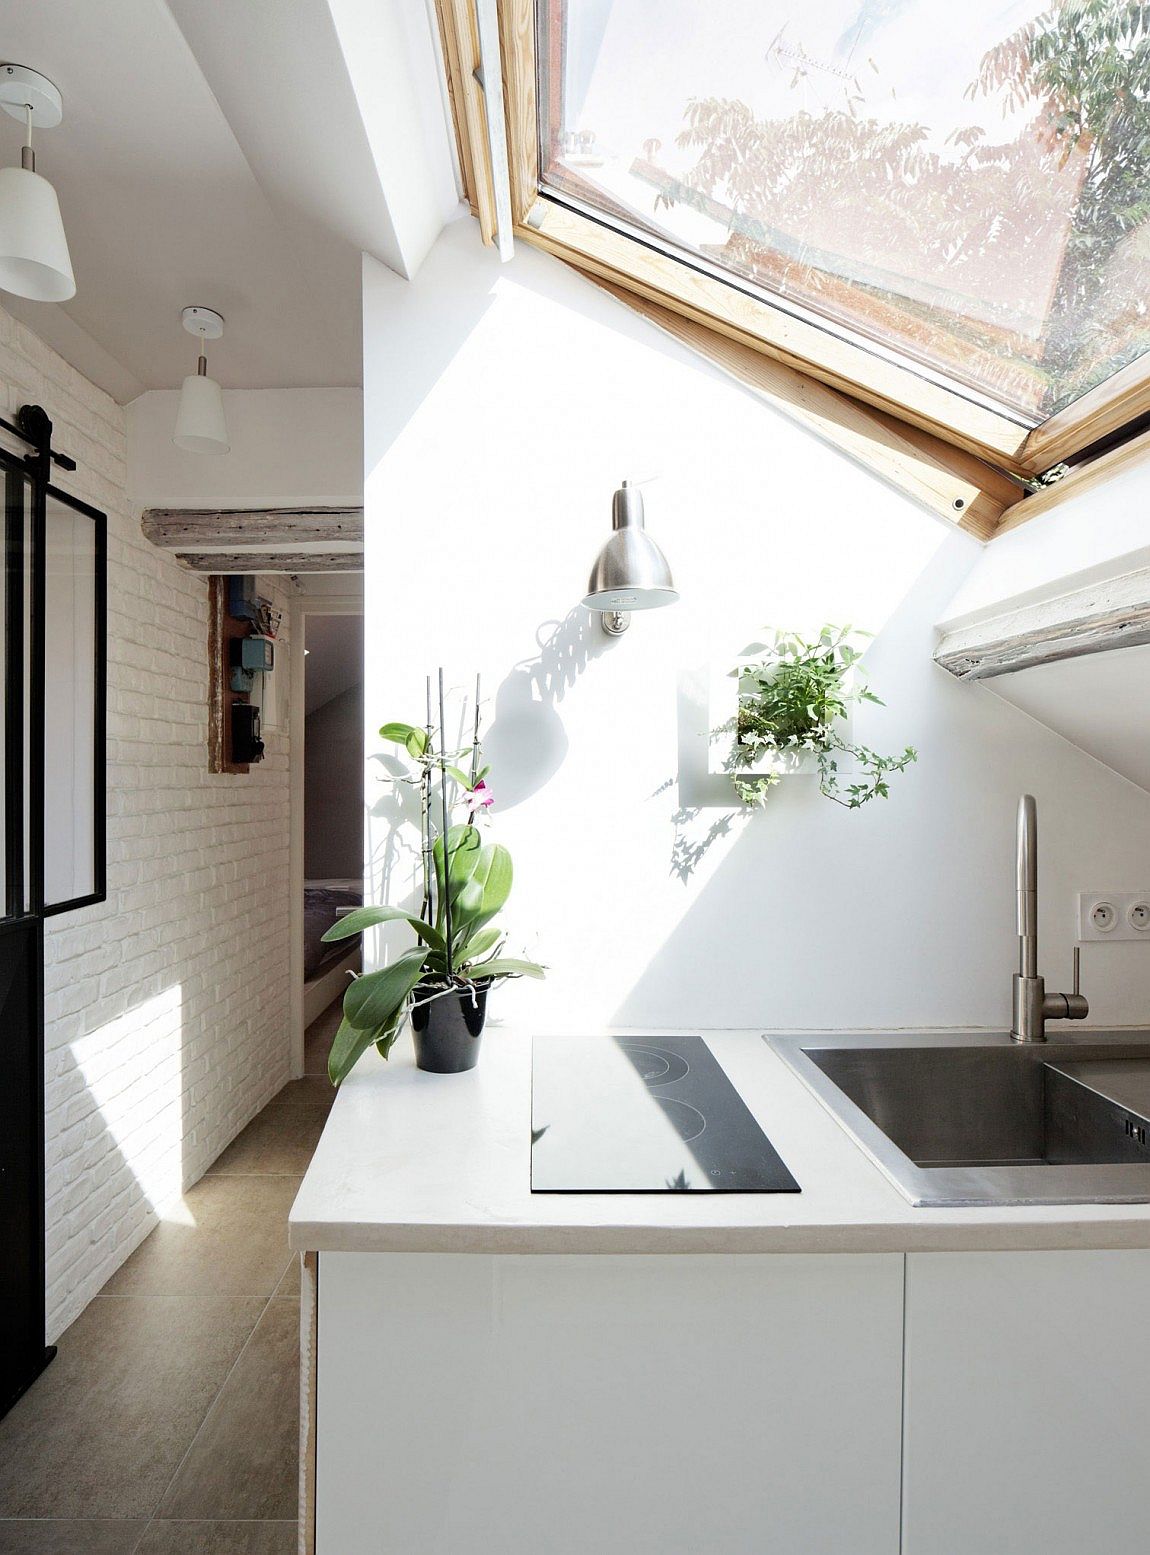 Skylight brings sunlight into the small kitchen